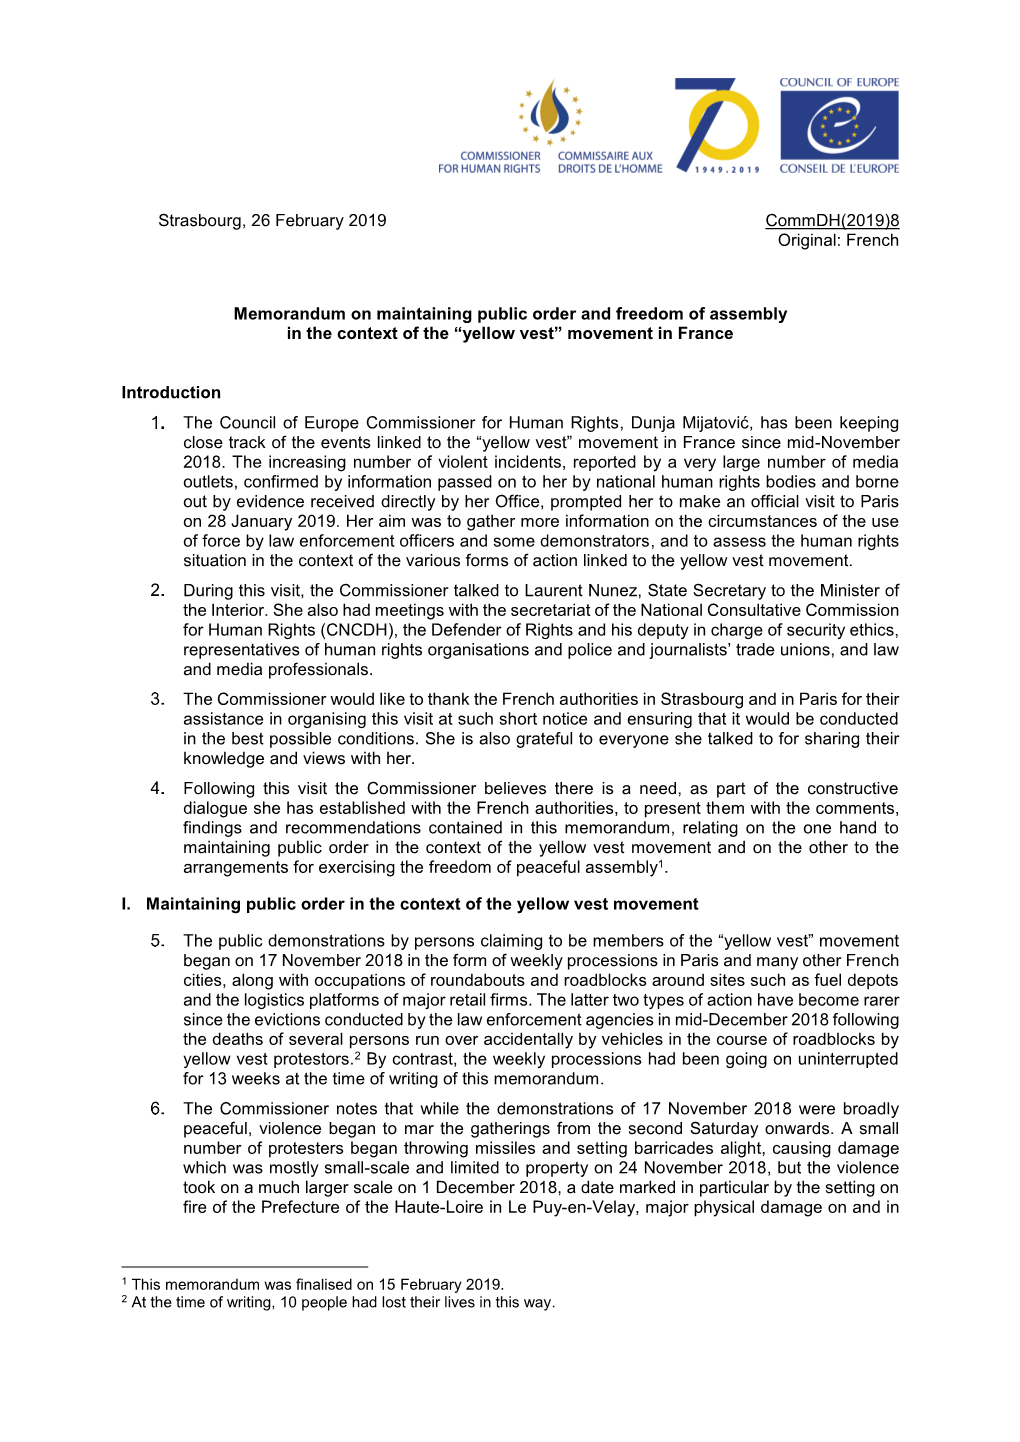 Memorandum on Maintaining Public Order and Freedom of Assembly in the Context of the “Yellow Vest” Movement in France